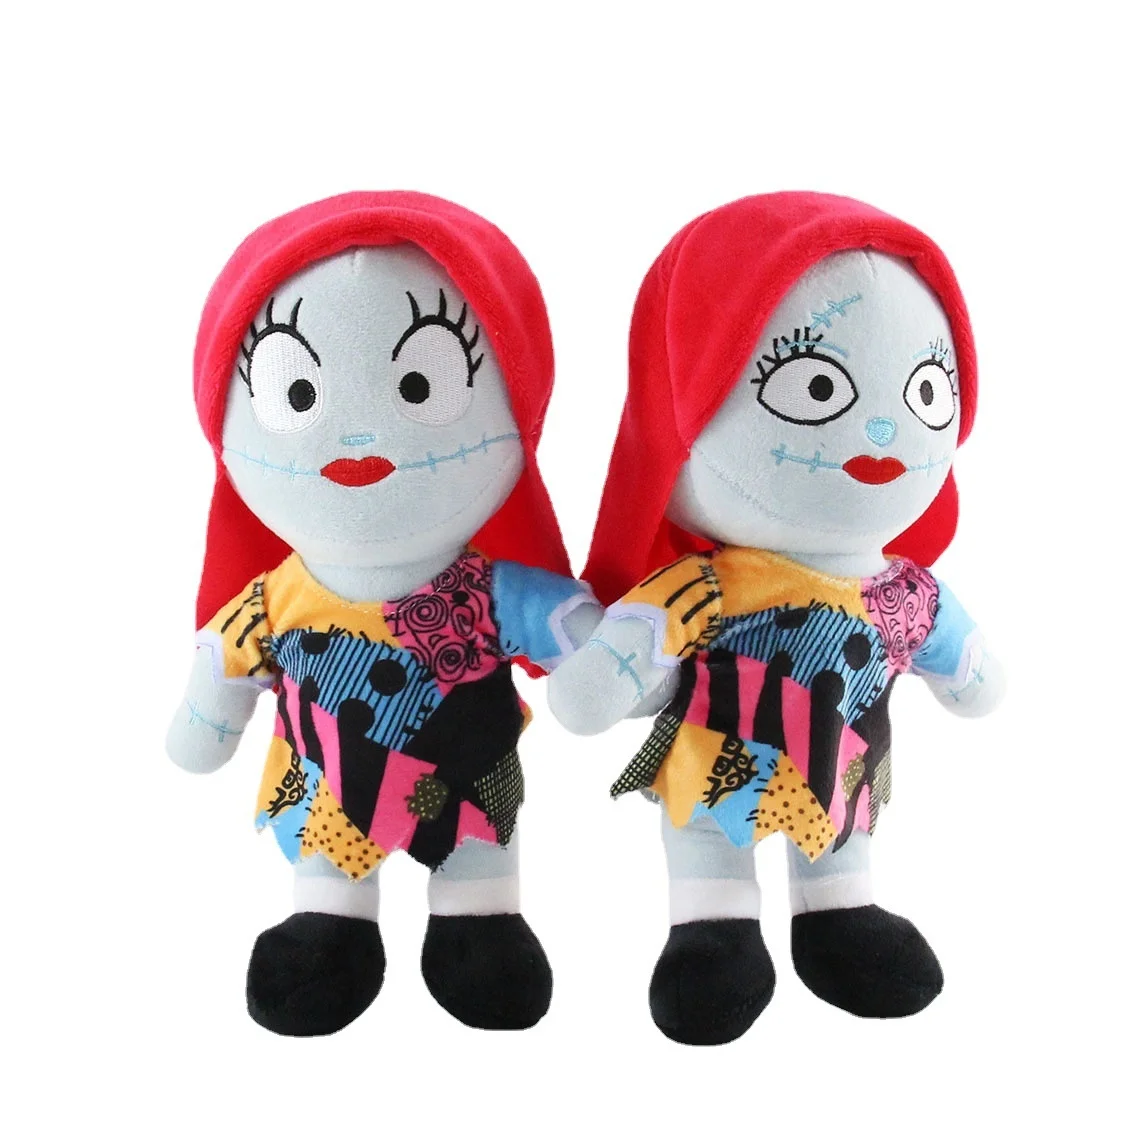 

25cm Sally The Nightmare Before Christmas Plush Jack Skellington And Sally Toy Ghost Bride Plushies Halloween Horror Movie Gift